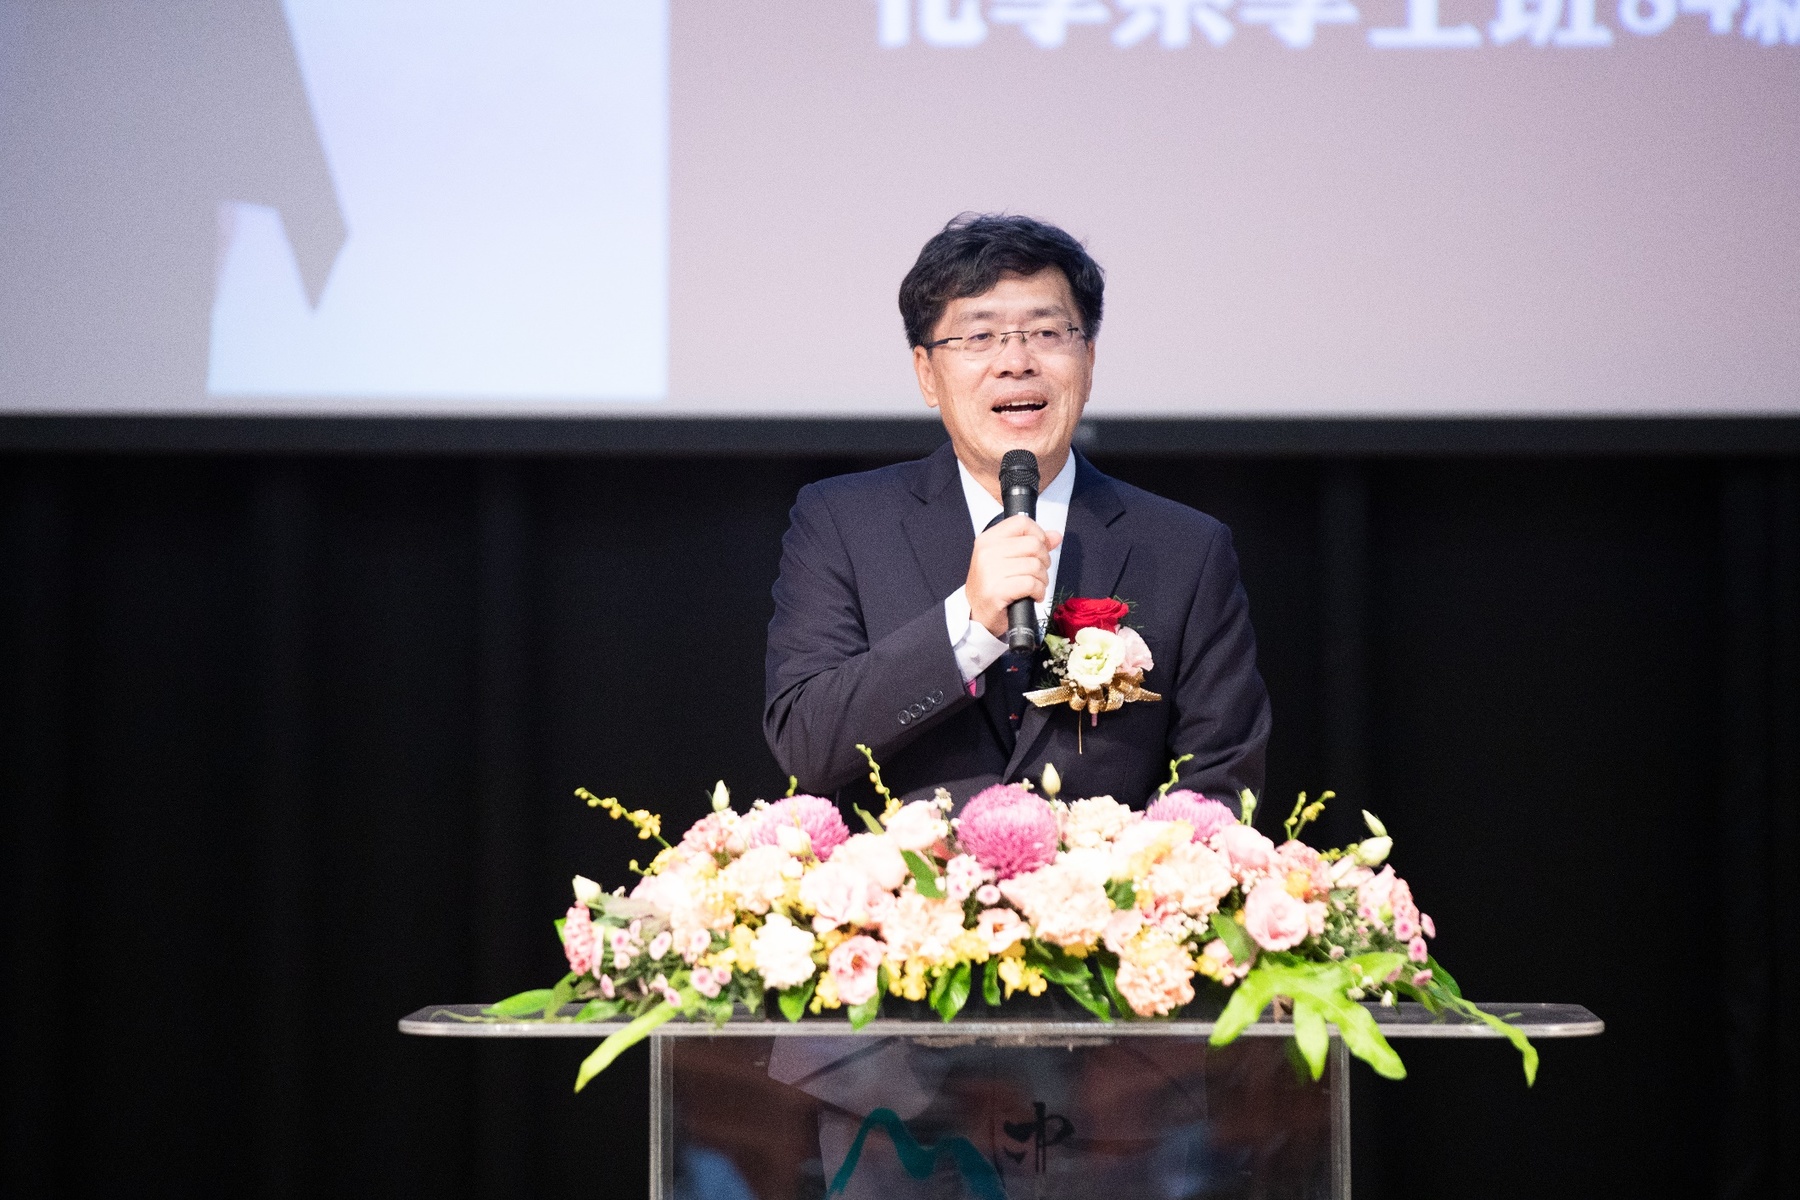 Sven Huang established GreenFILTEC in 2014, developing chemical filters for semiconductor factories and mobile micro-pollution filtration systems, mainly to be used in advanced semiconductor processes. His company became a close partner of major semiconductor tech firms. In 2018, the company was awarded the 15th National Brand Yushan Award for Best Product and in 2019, it was awarded the 42th Award for Models of Taiwan Entrepreneurship by the Ministry of Economic Affairs. In 2020, GreenFILTEC continuously donated compound independent isolation cabins and positive pressure testing booths making a contribution to the COVID-19 pandemic prevention in Taiwan. In response to Taiwan government's policy of retaining domestic industries, Chairman Huang will invest NT$430 million in the green industry in Tainan Southern Taiwan Science Park in 2021. As the current President of the Department of Chemistry Alumni Association, he has been closely interacting with the University and the industry, attracting resources to the industry and providing employment opportunities to NSYSU students.